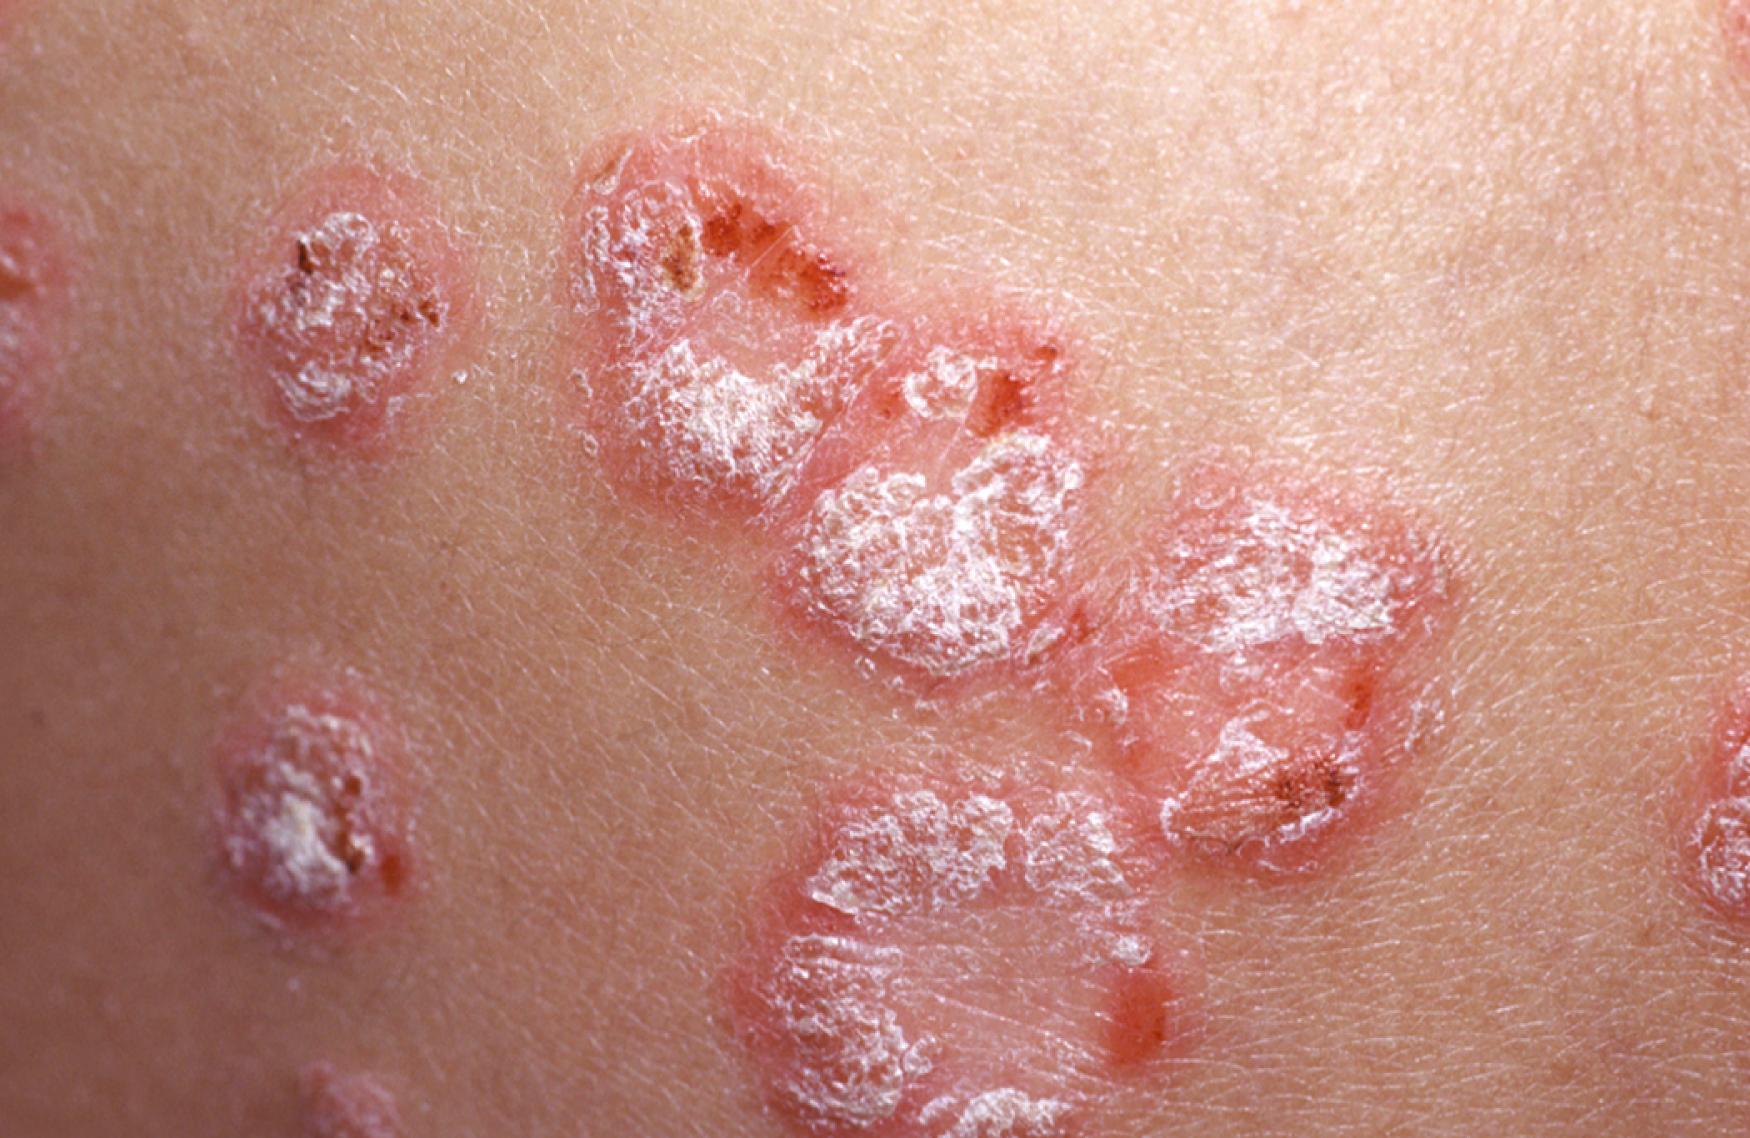 Fig. 61.5, Well-demarcated erythematous, scaly plaques of psoriasis.